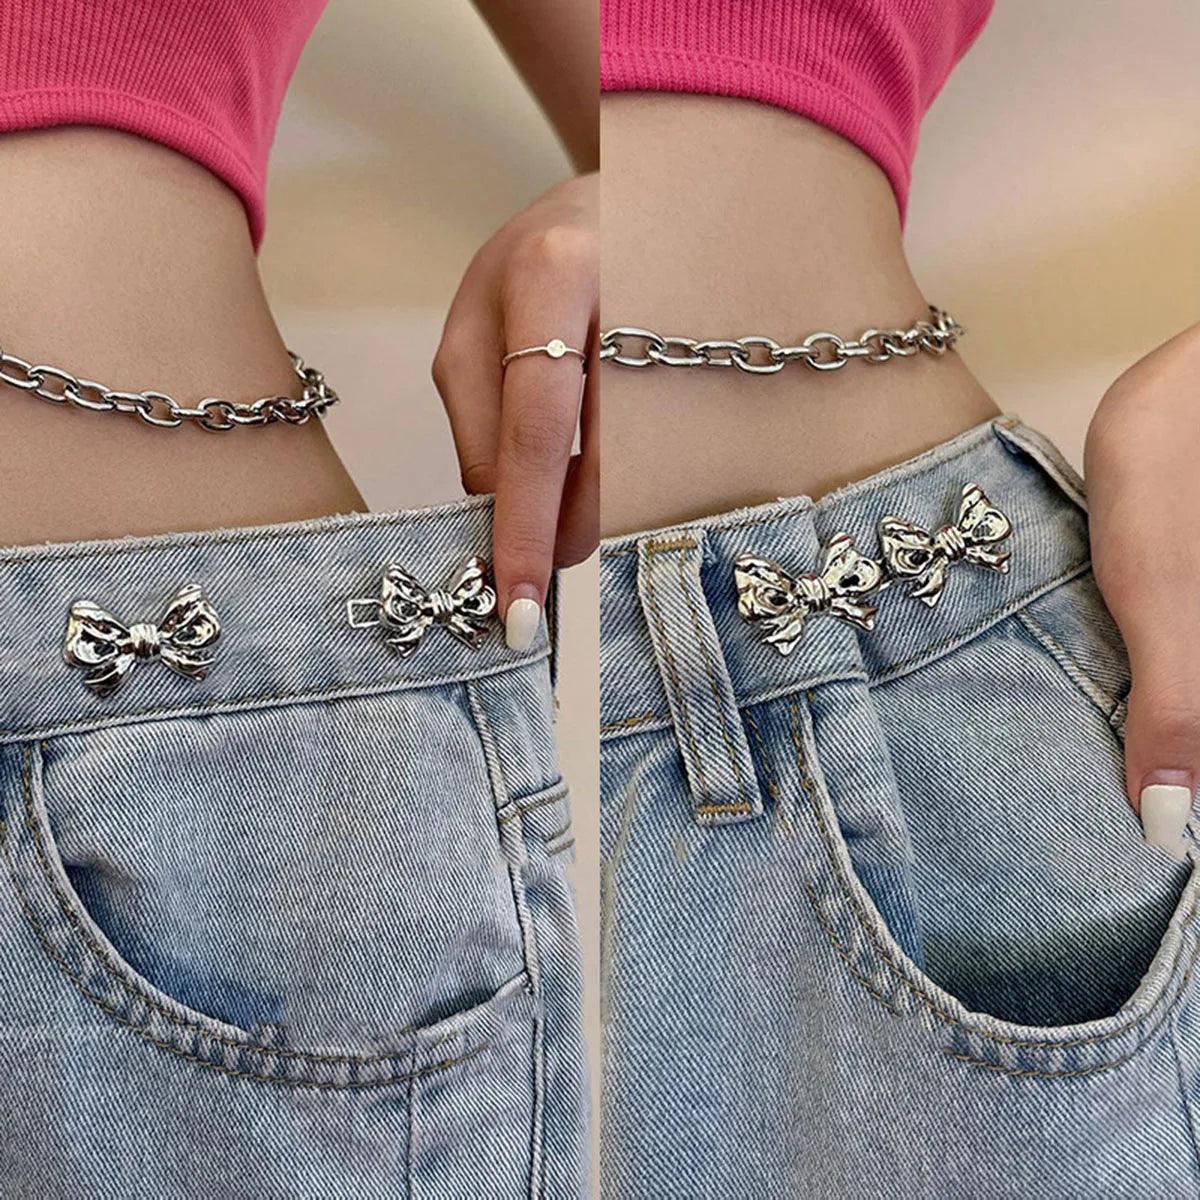 Bowknot Button Adjuster - Innovative Waist Tightener for Pants and Skirts  ourlum.com   